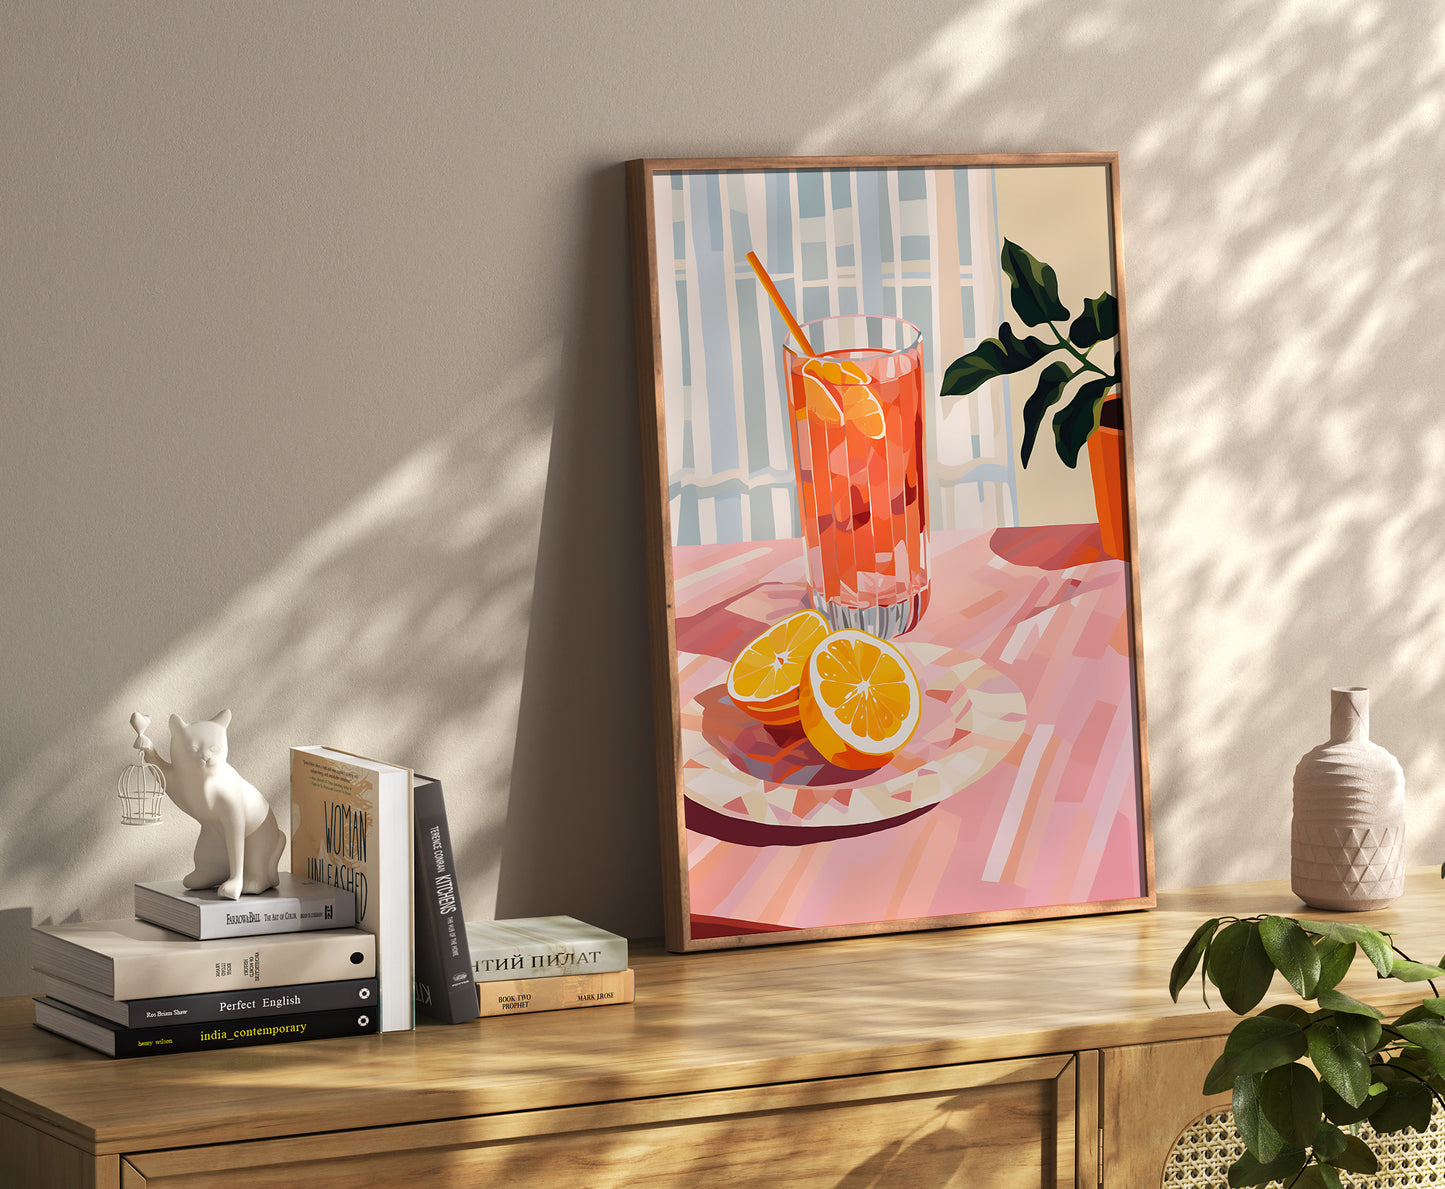 A framed painting of a vibrant orange drink on a sunny table, adorned with decor and books.